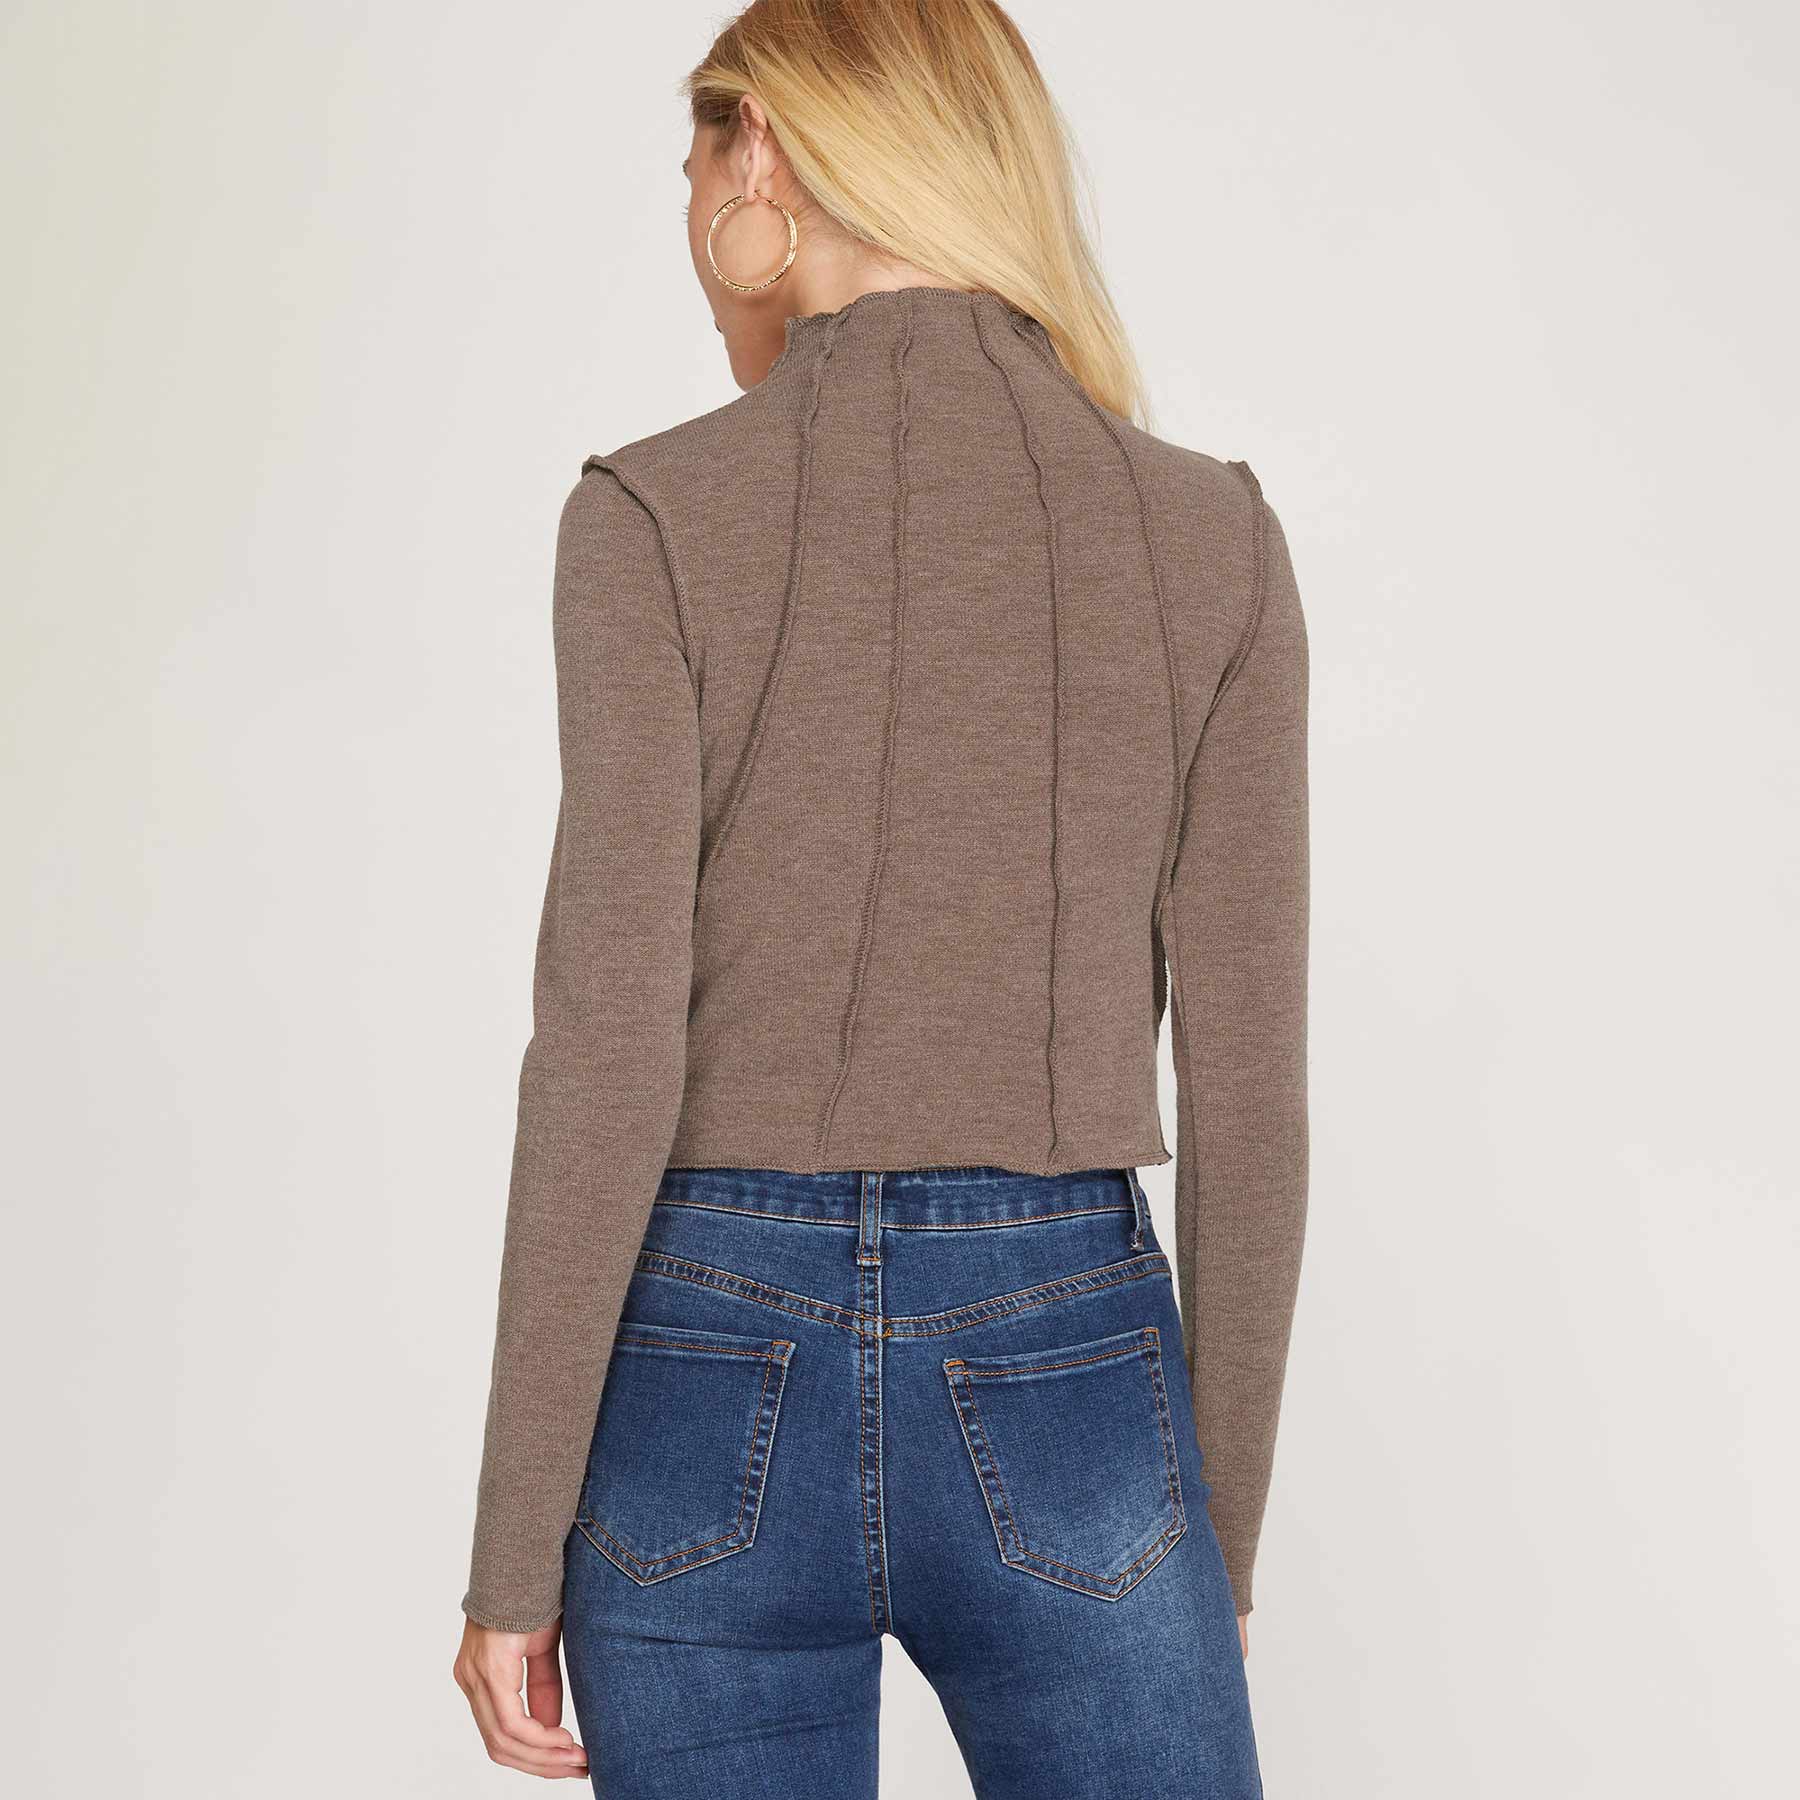 Long Sleeve Knit Top with Overlock Seam Trim Detail